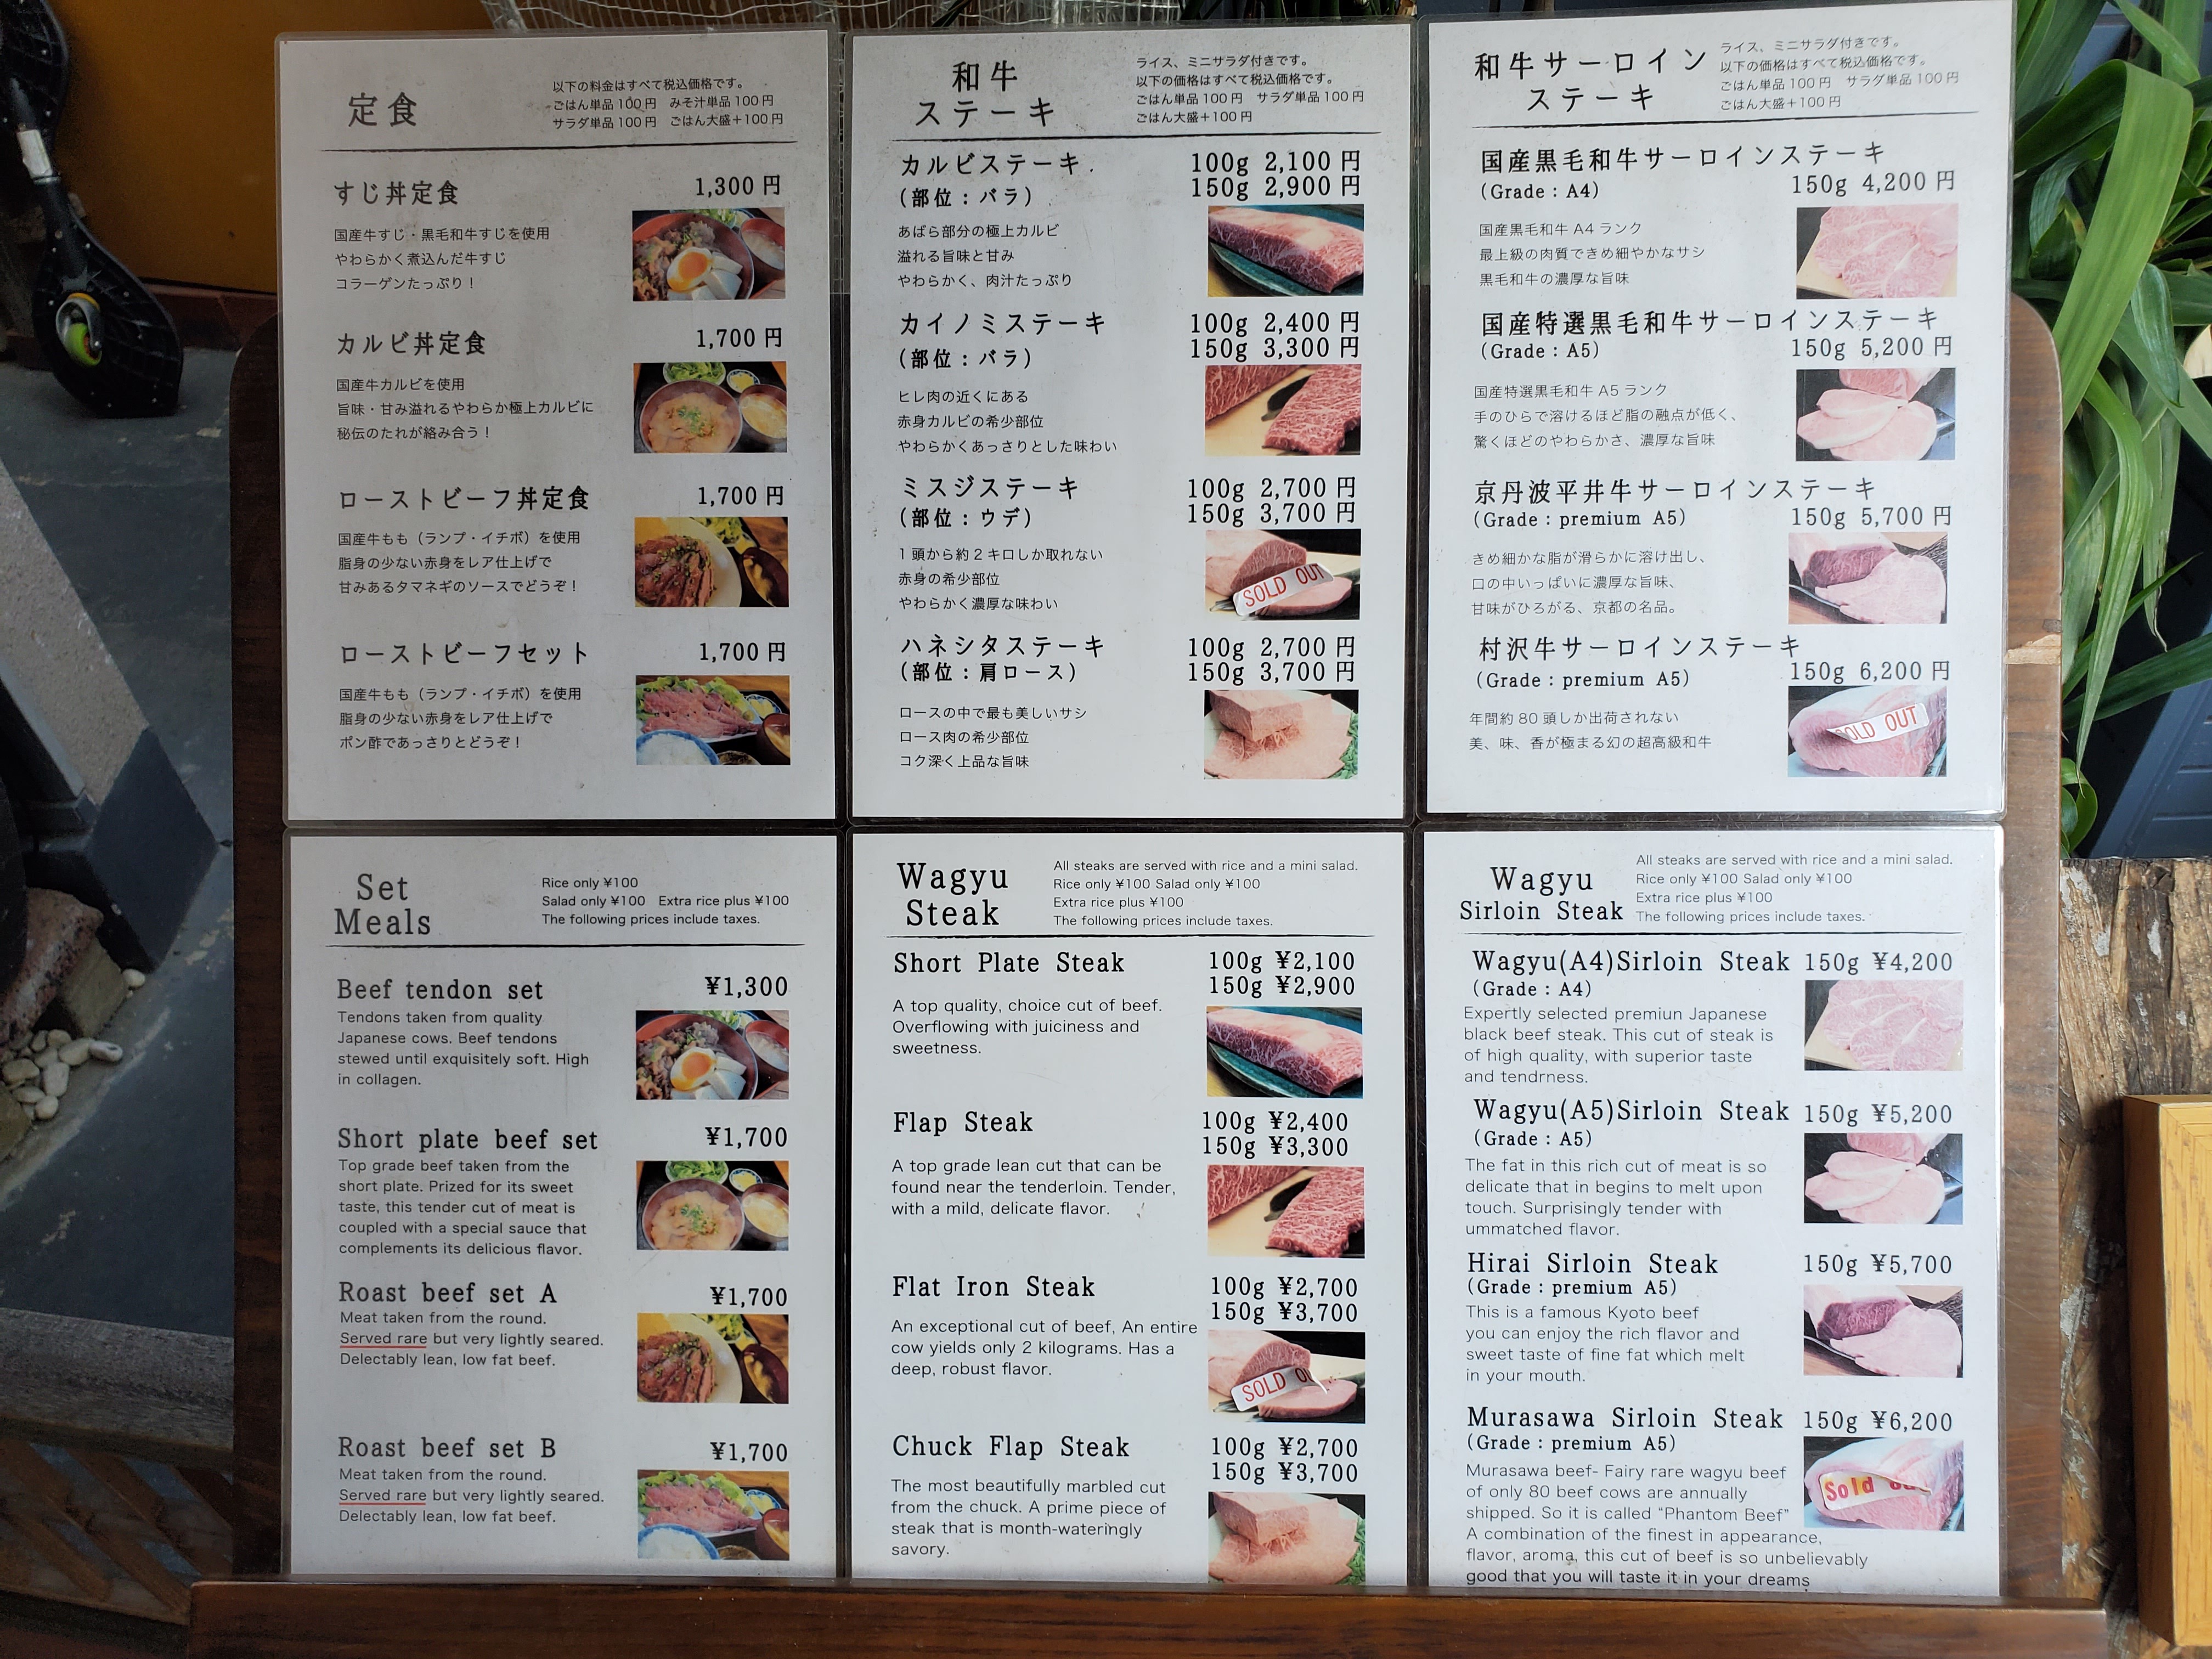 Otsuka Menu and Prices for wagyu beef options from April 2019